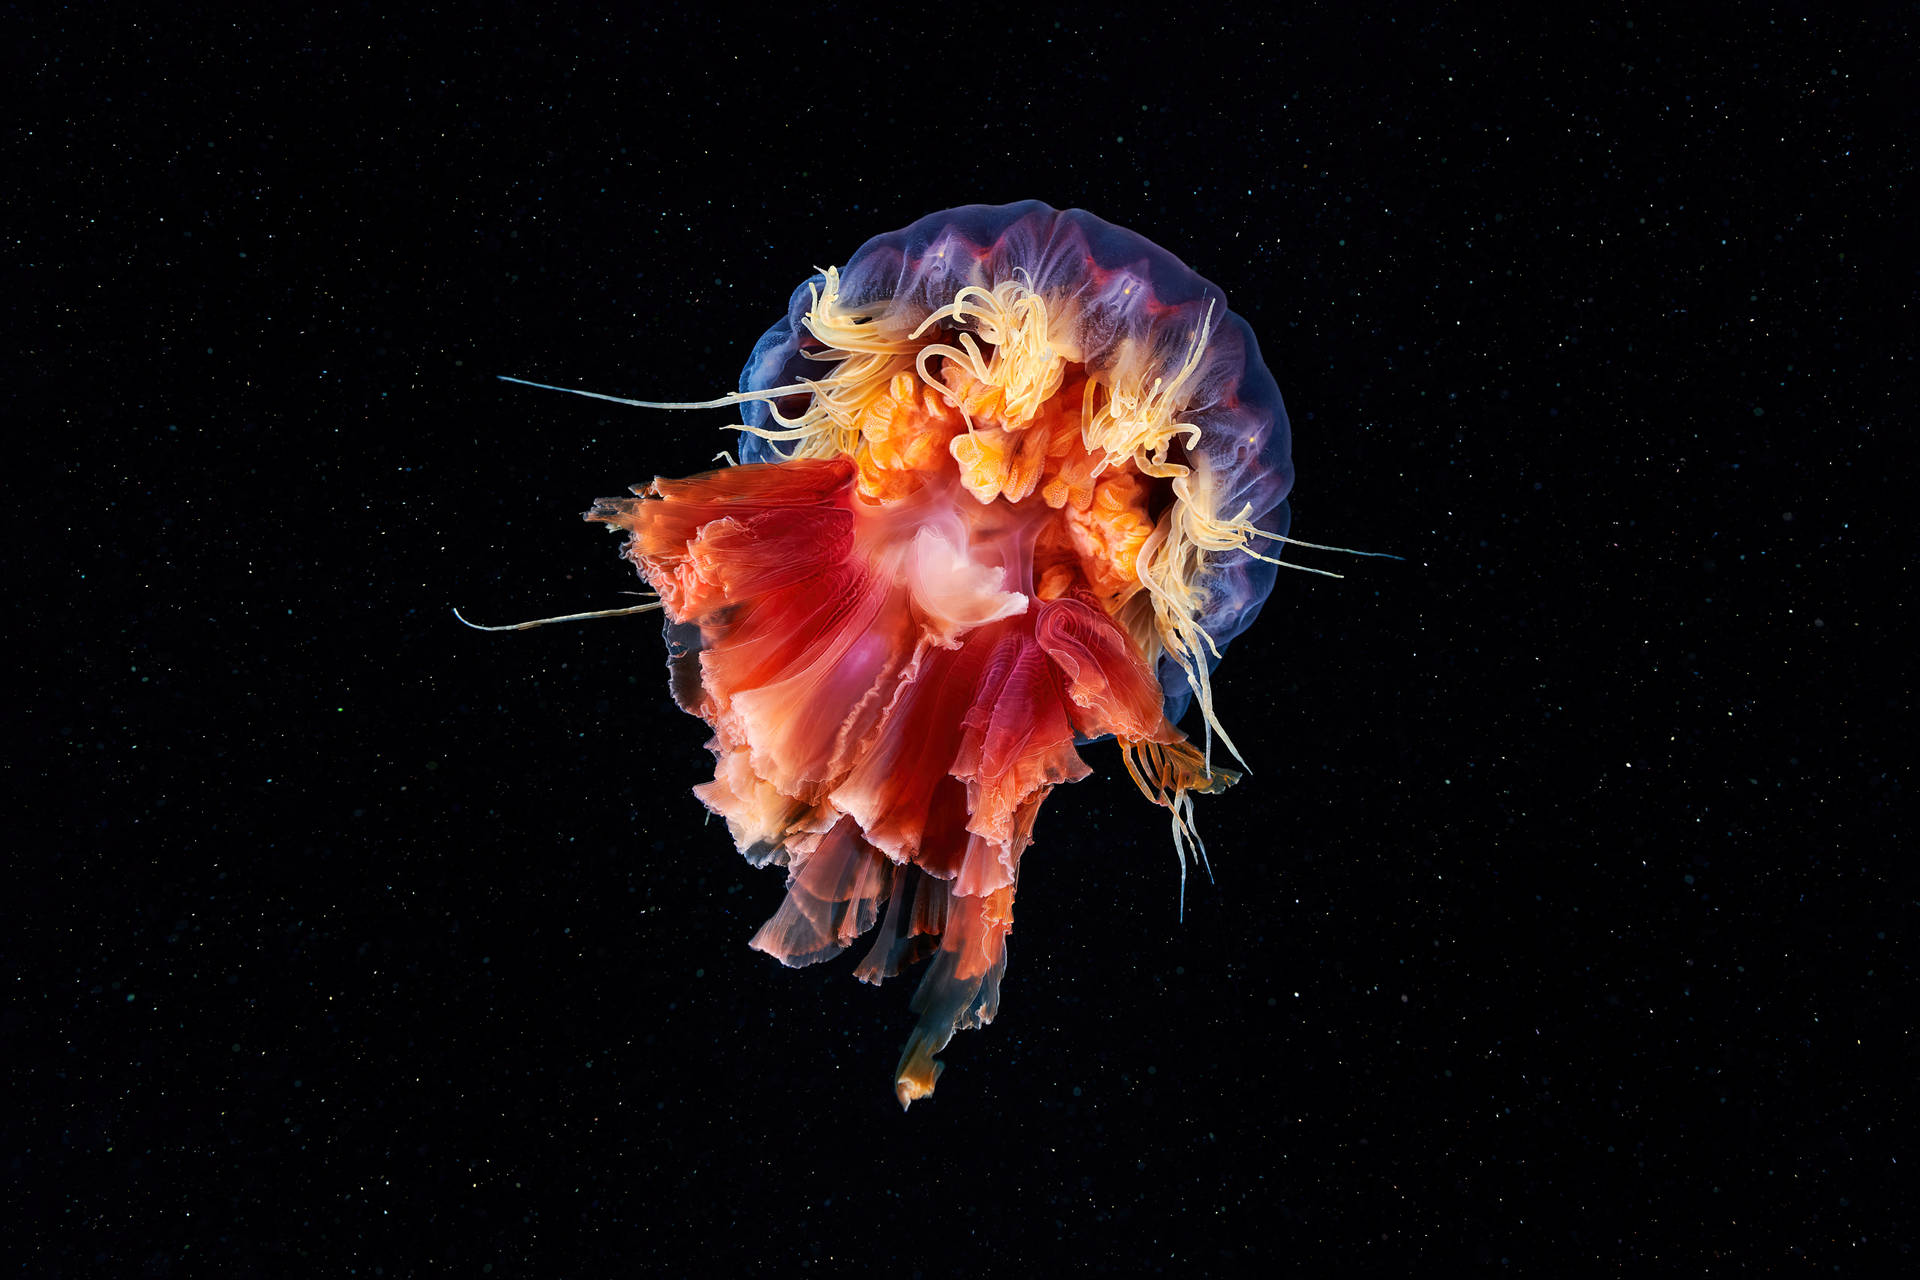 Stunning Display Of Jellyfish Art In The Darkness Of Space